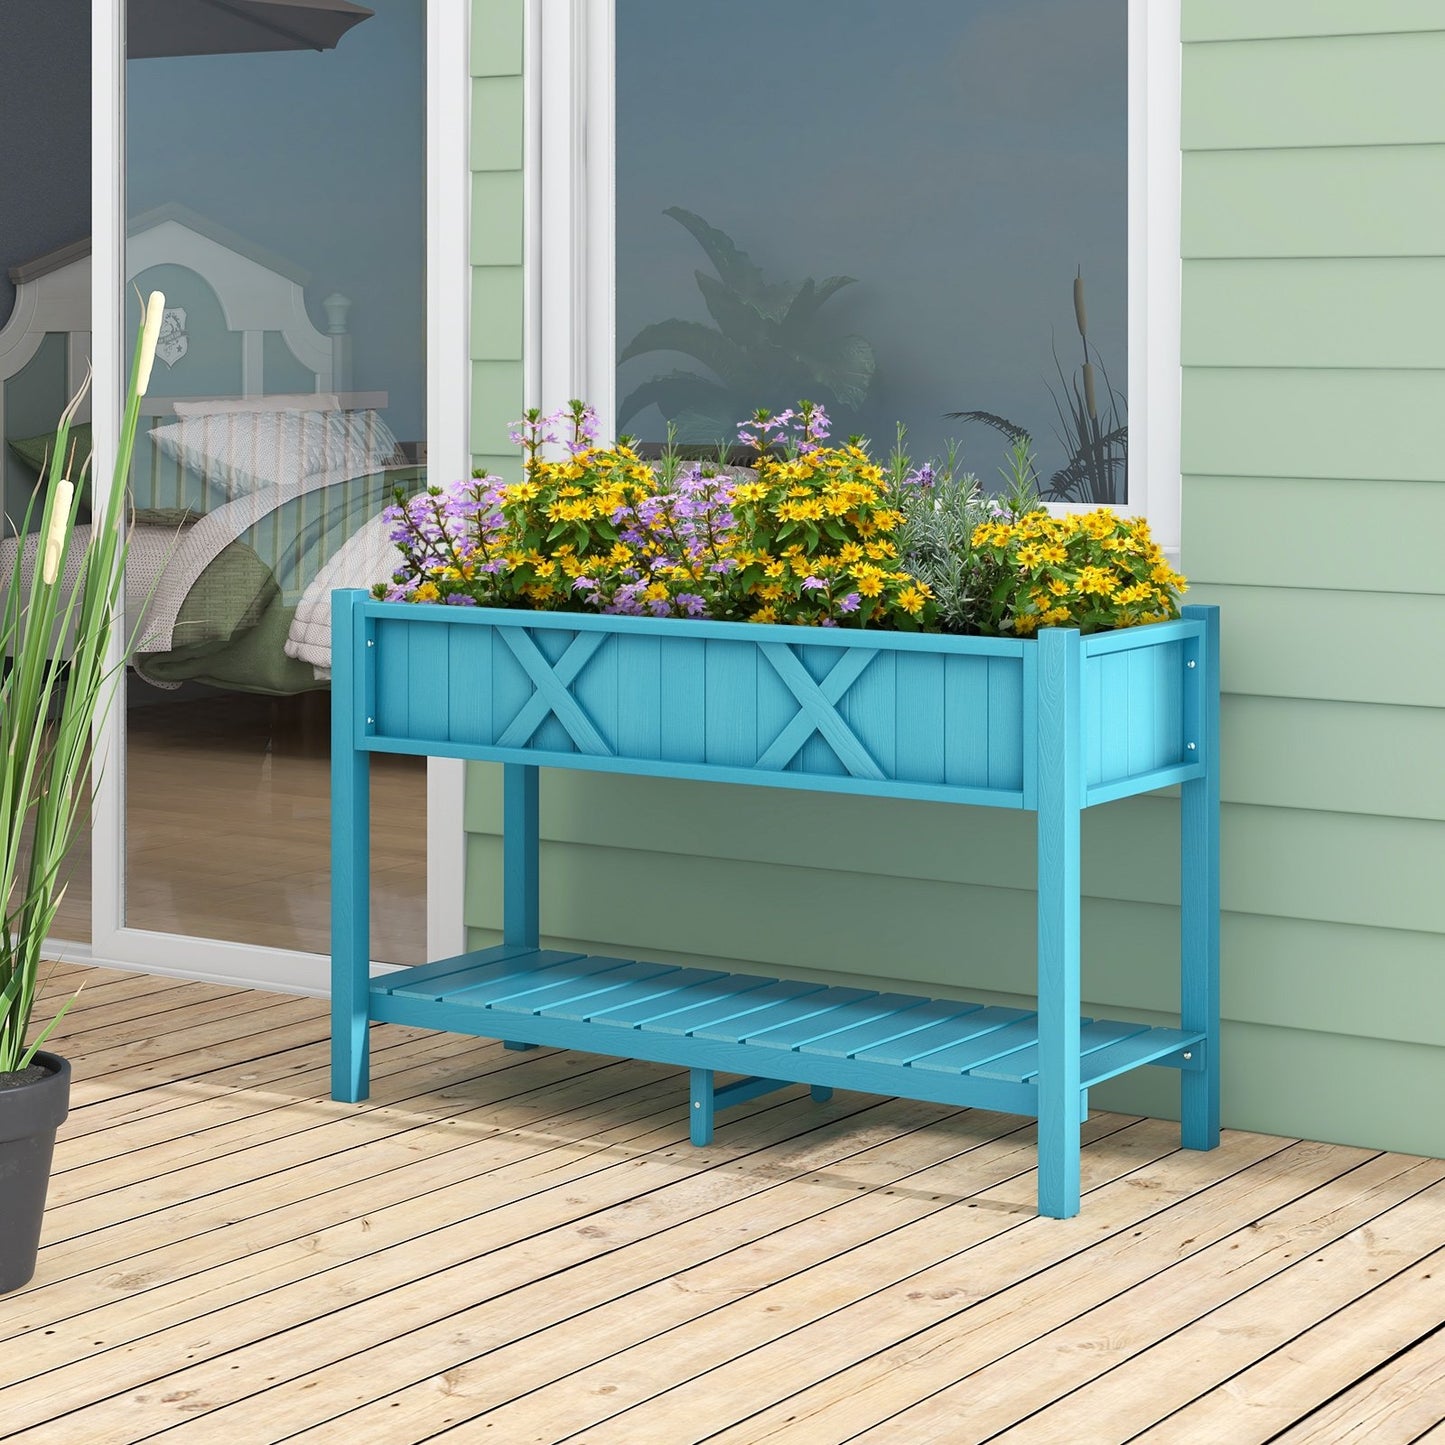 Poly Wood Elevated Planter Box with Legs Storage Shelf Drainage Holes, Coffee at Gallery Canada